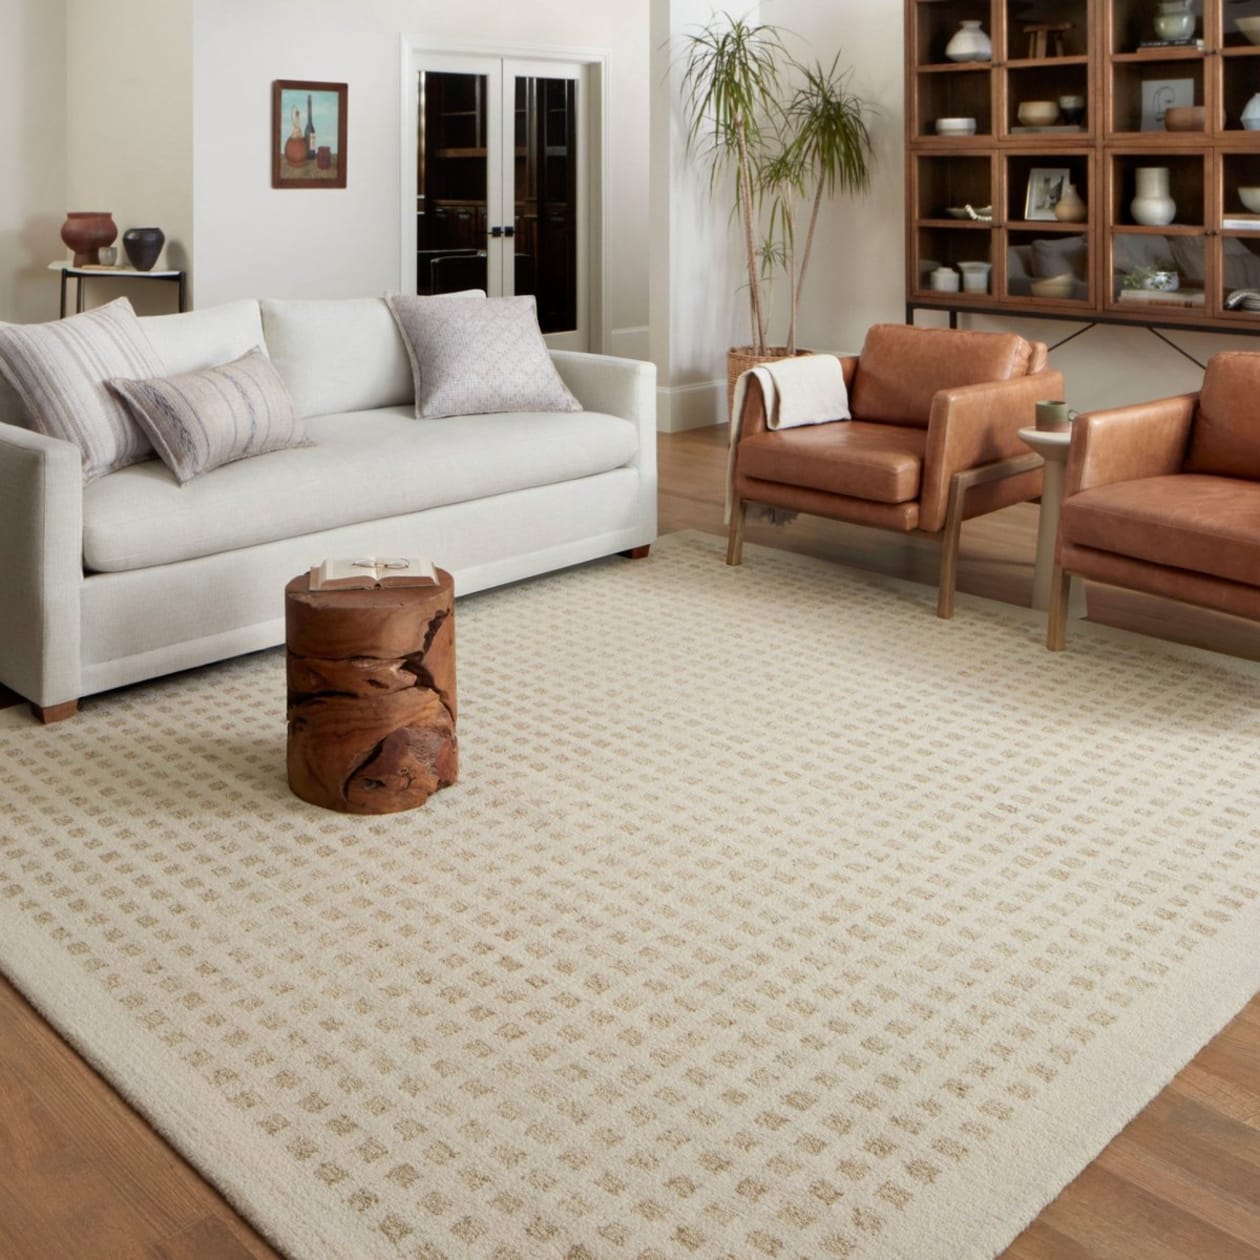 8x10 Oval Rugs: Tie Your Space Together